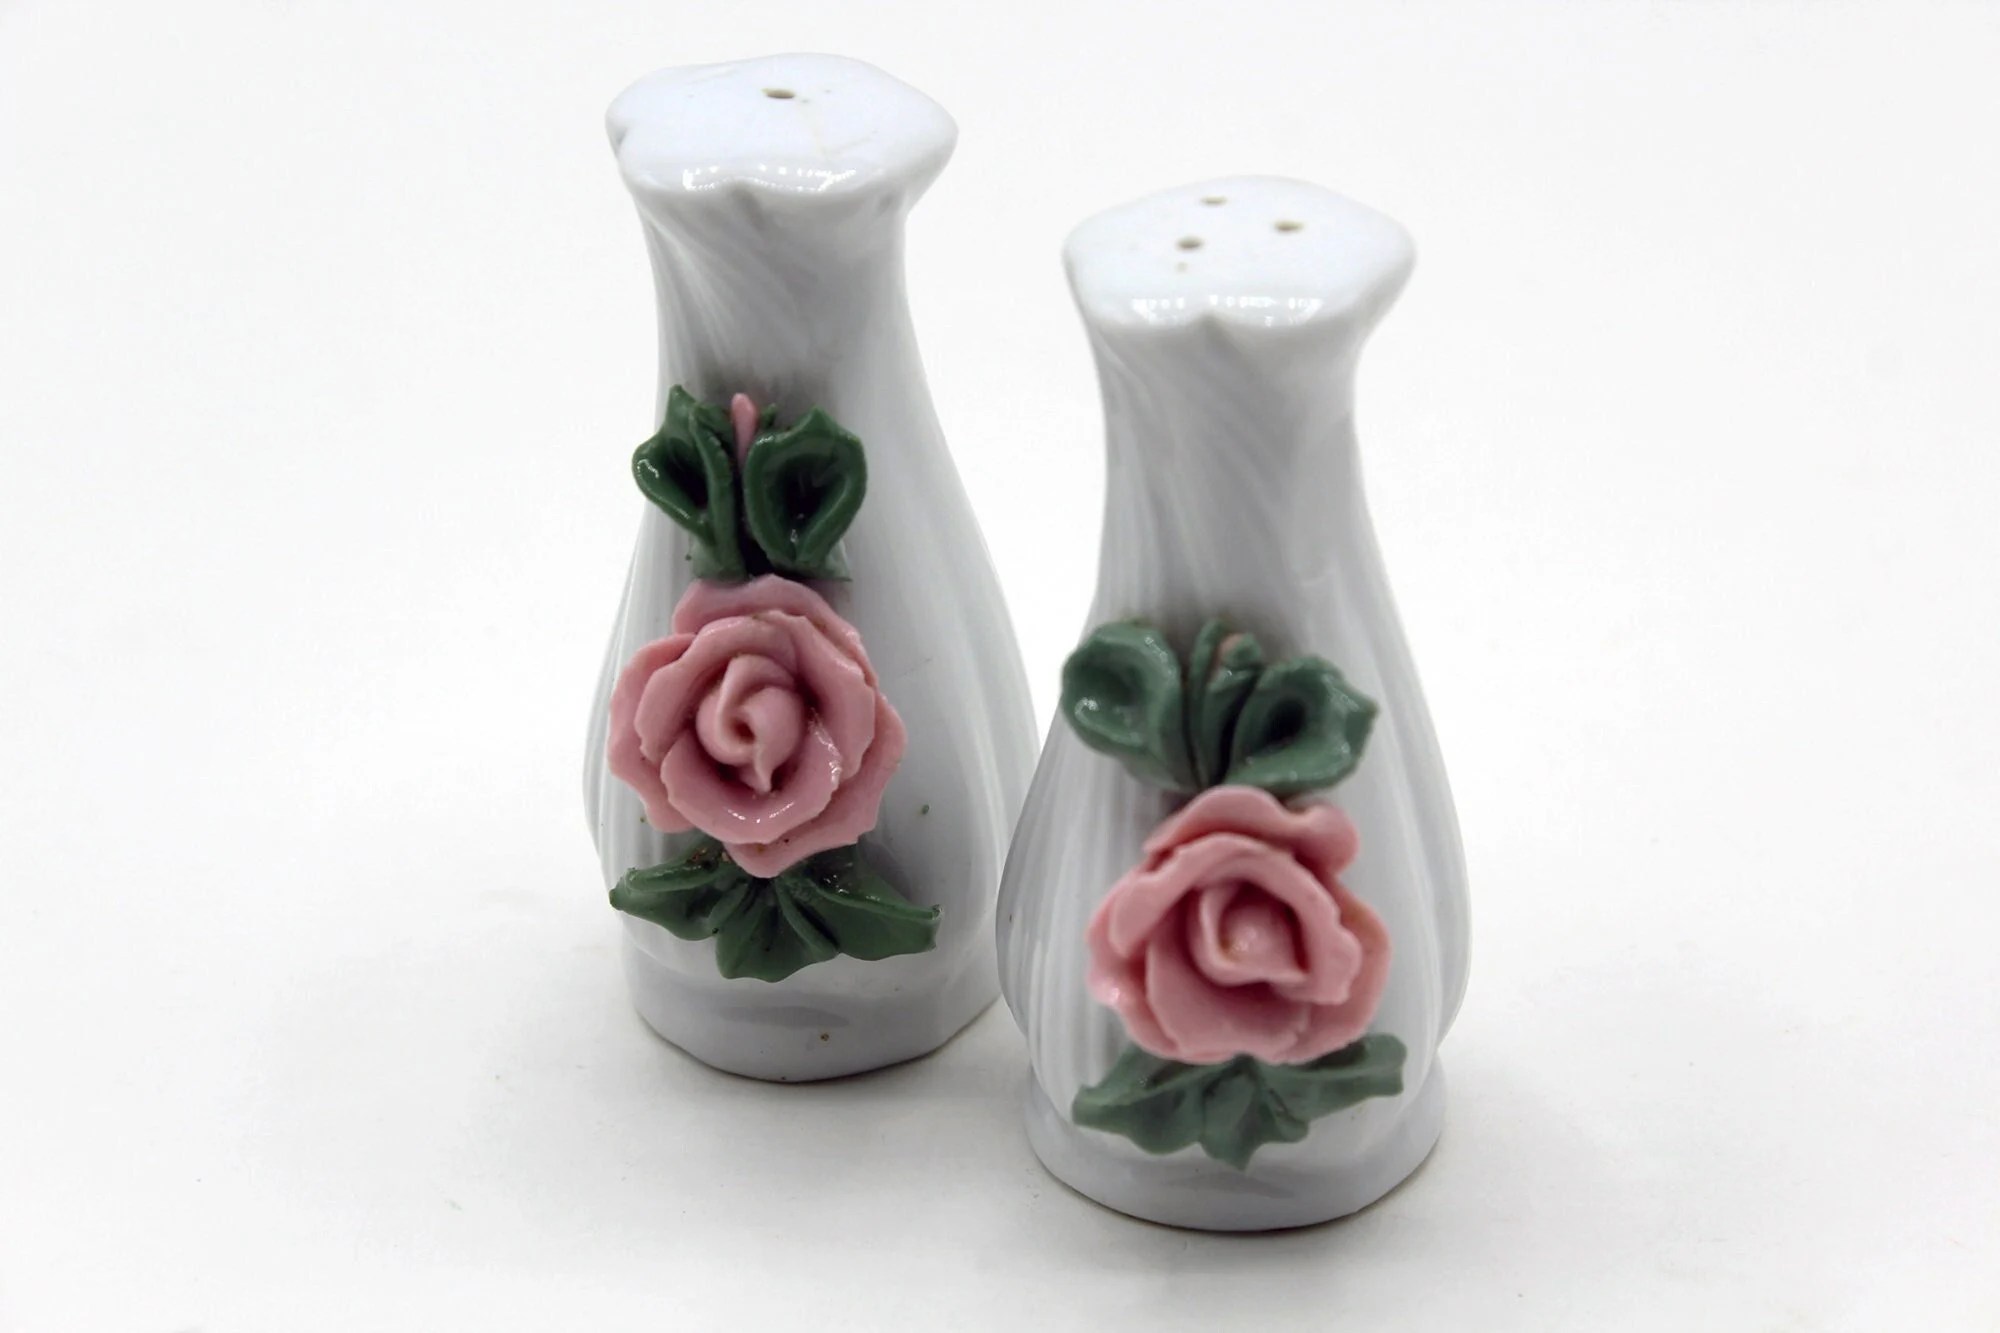 Porcelain Ceramic Applied Flowers Salt and Pepper Shakers - Made in China  - 1980s, Vintage, Dainty, Grandma, Old Fashioned, Traditional